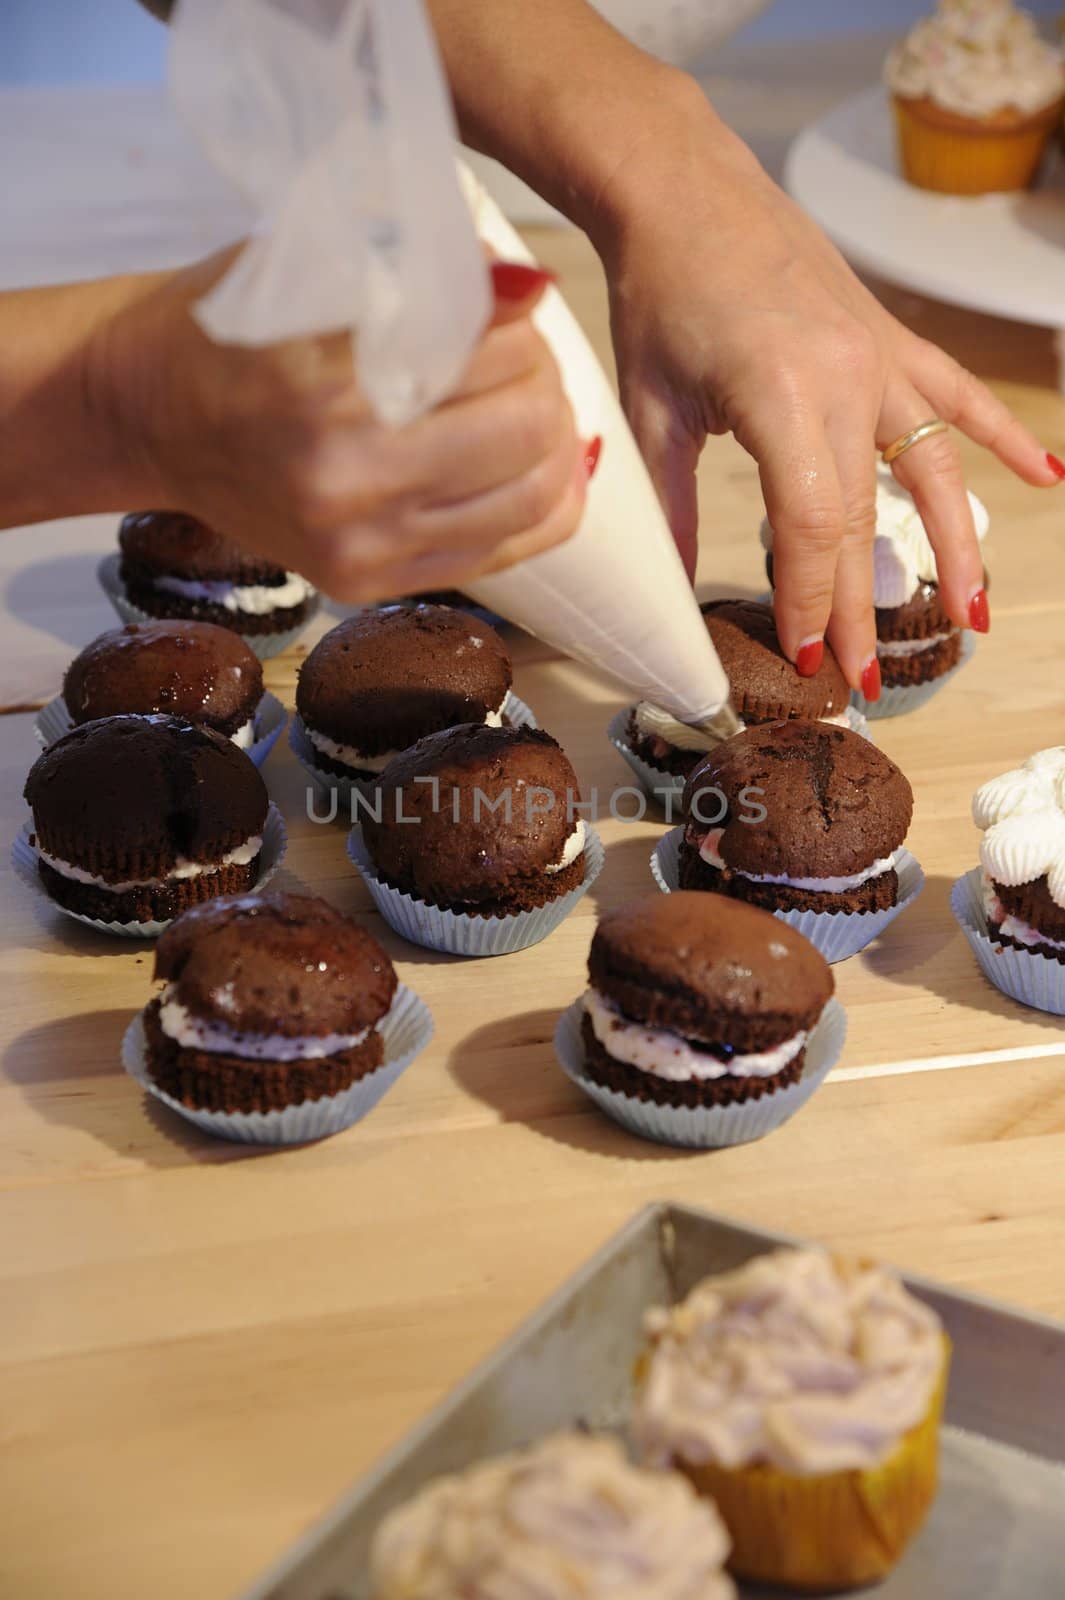 The preparation of tastefully beautiful cupcakes